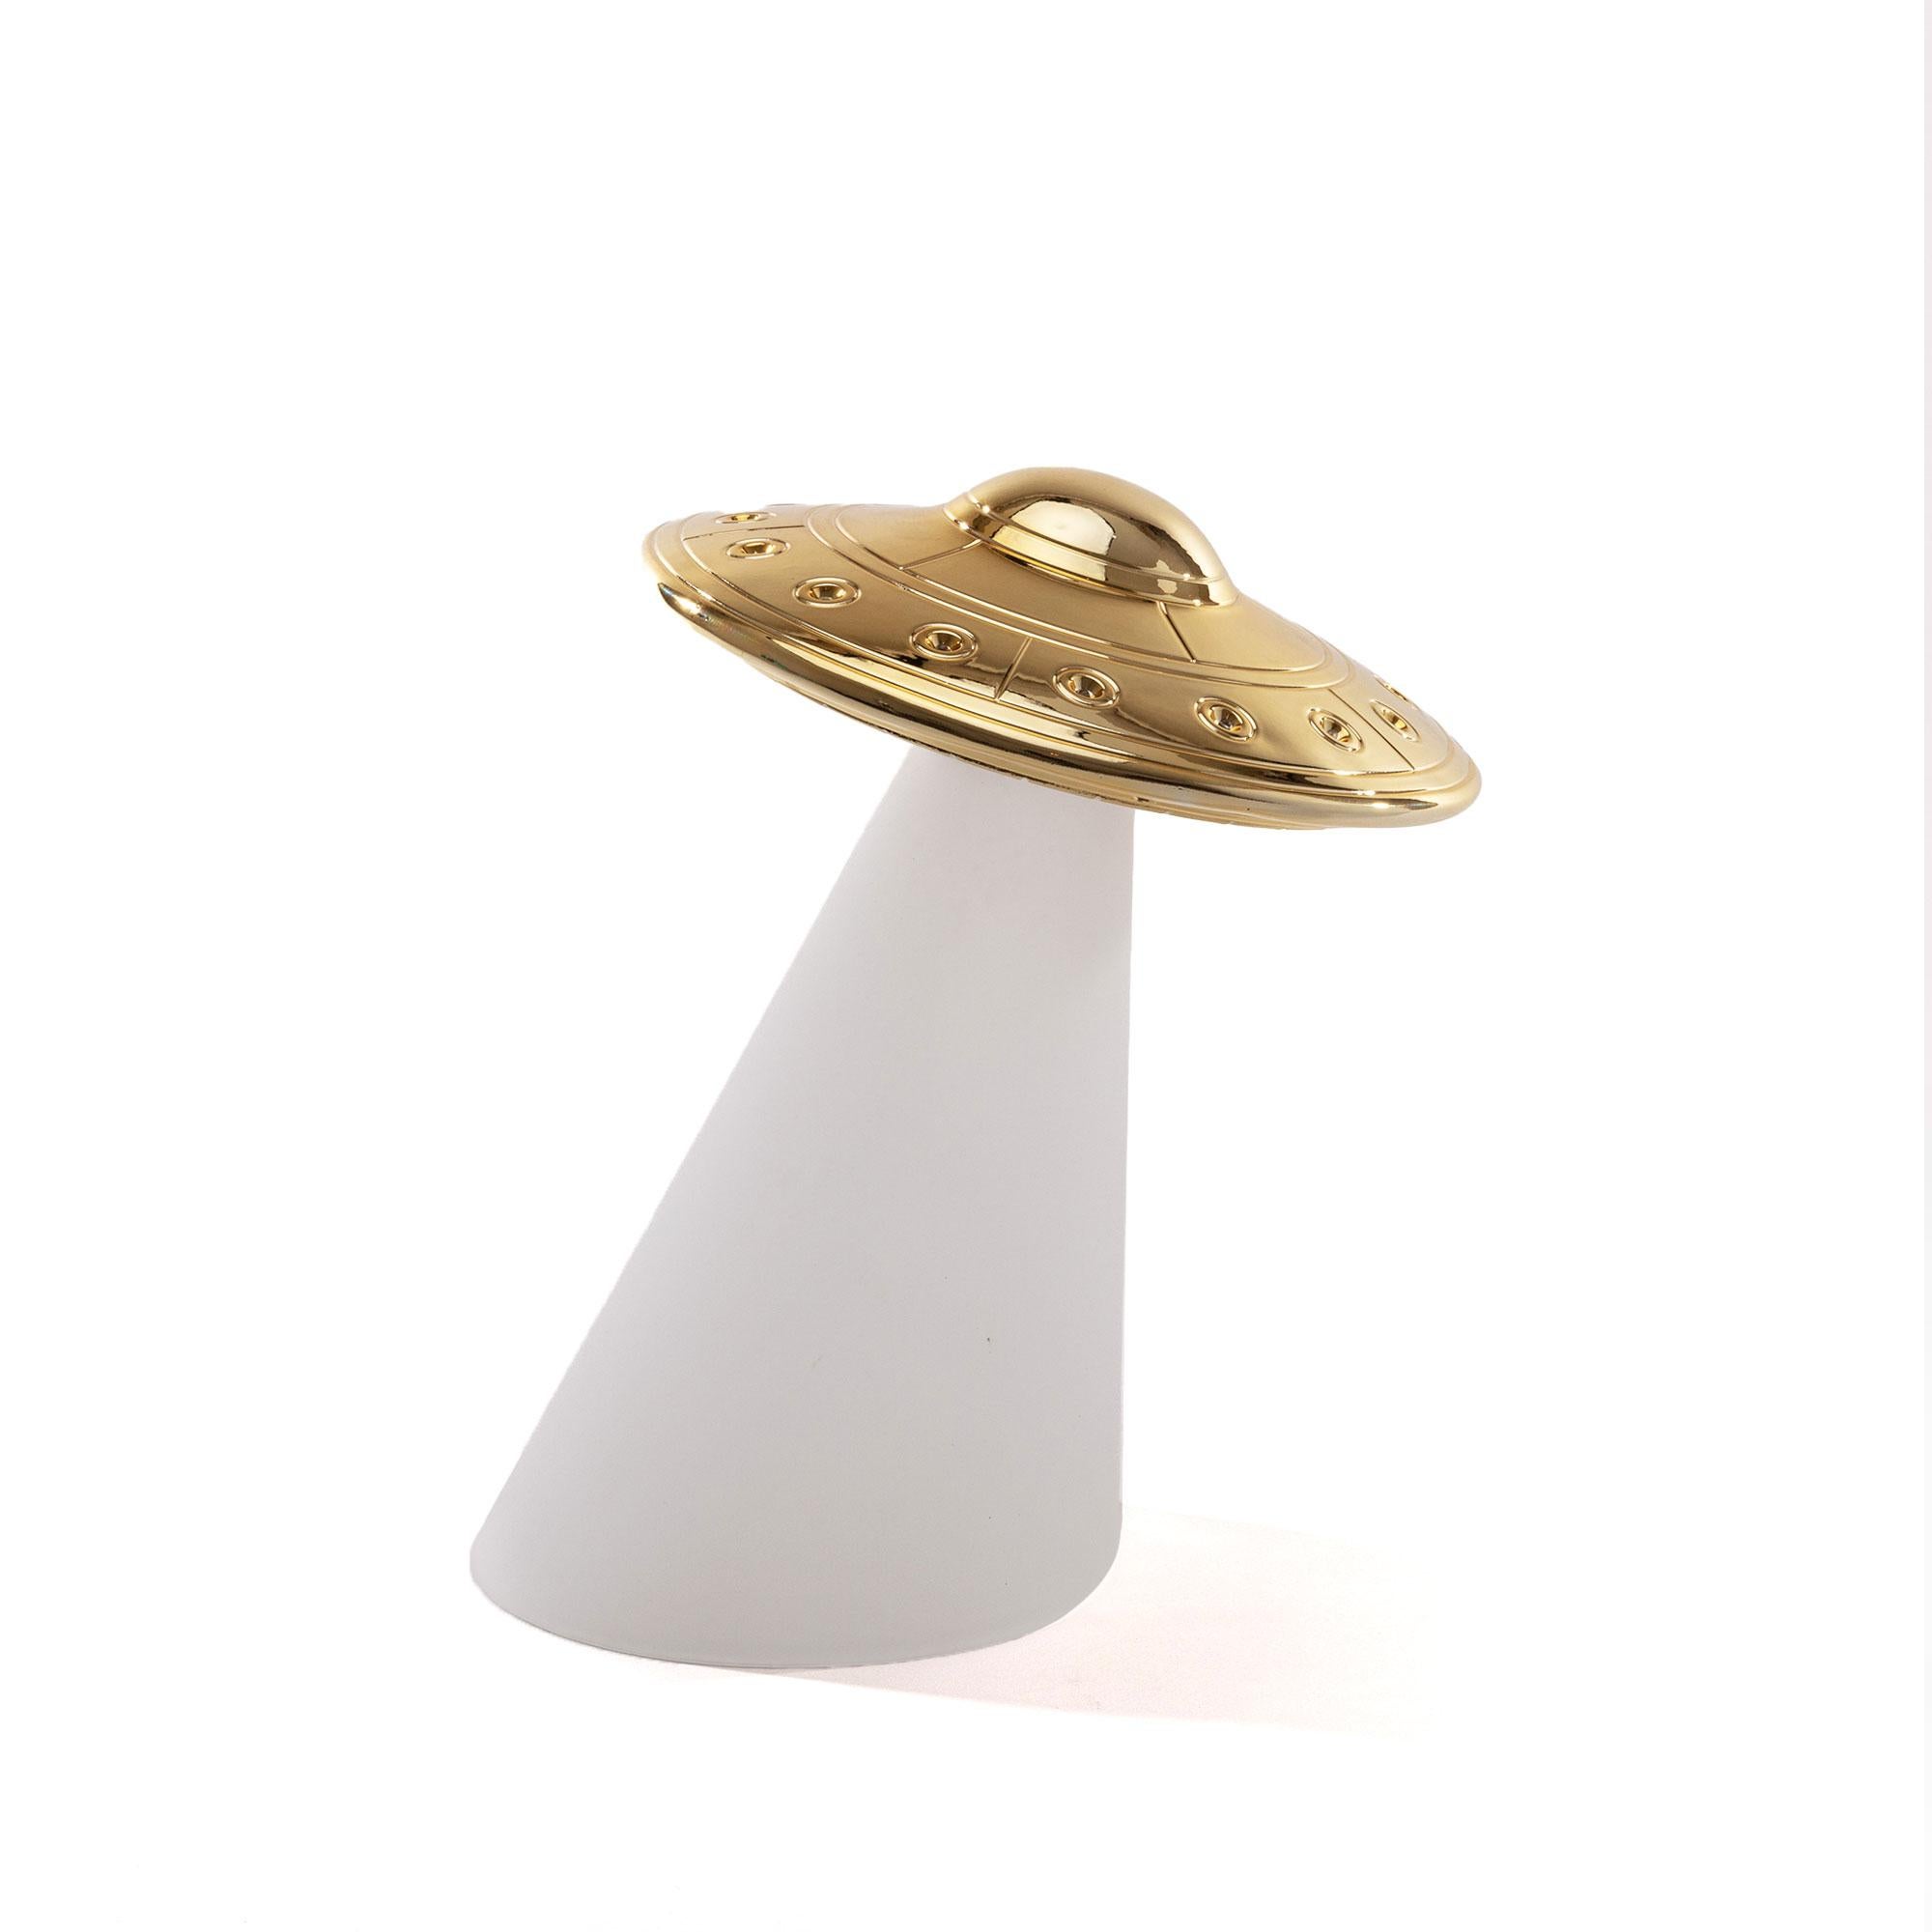 An original souvenir from the cult city of Roswell in New Mexico, site of the alleged alien accident in 1947. The UFO conspiracy lands on your table or nightstand. A cult, kitsch and retro American-inspired souvenir.